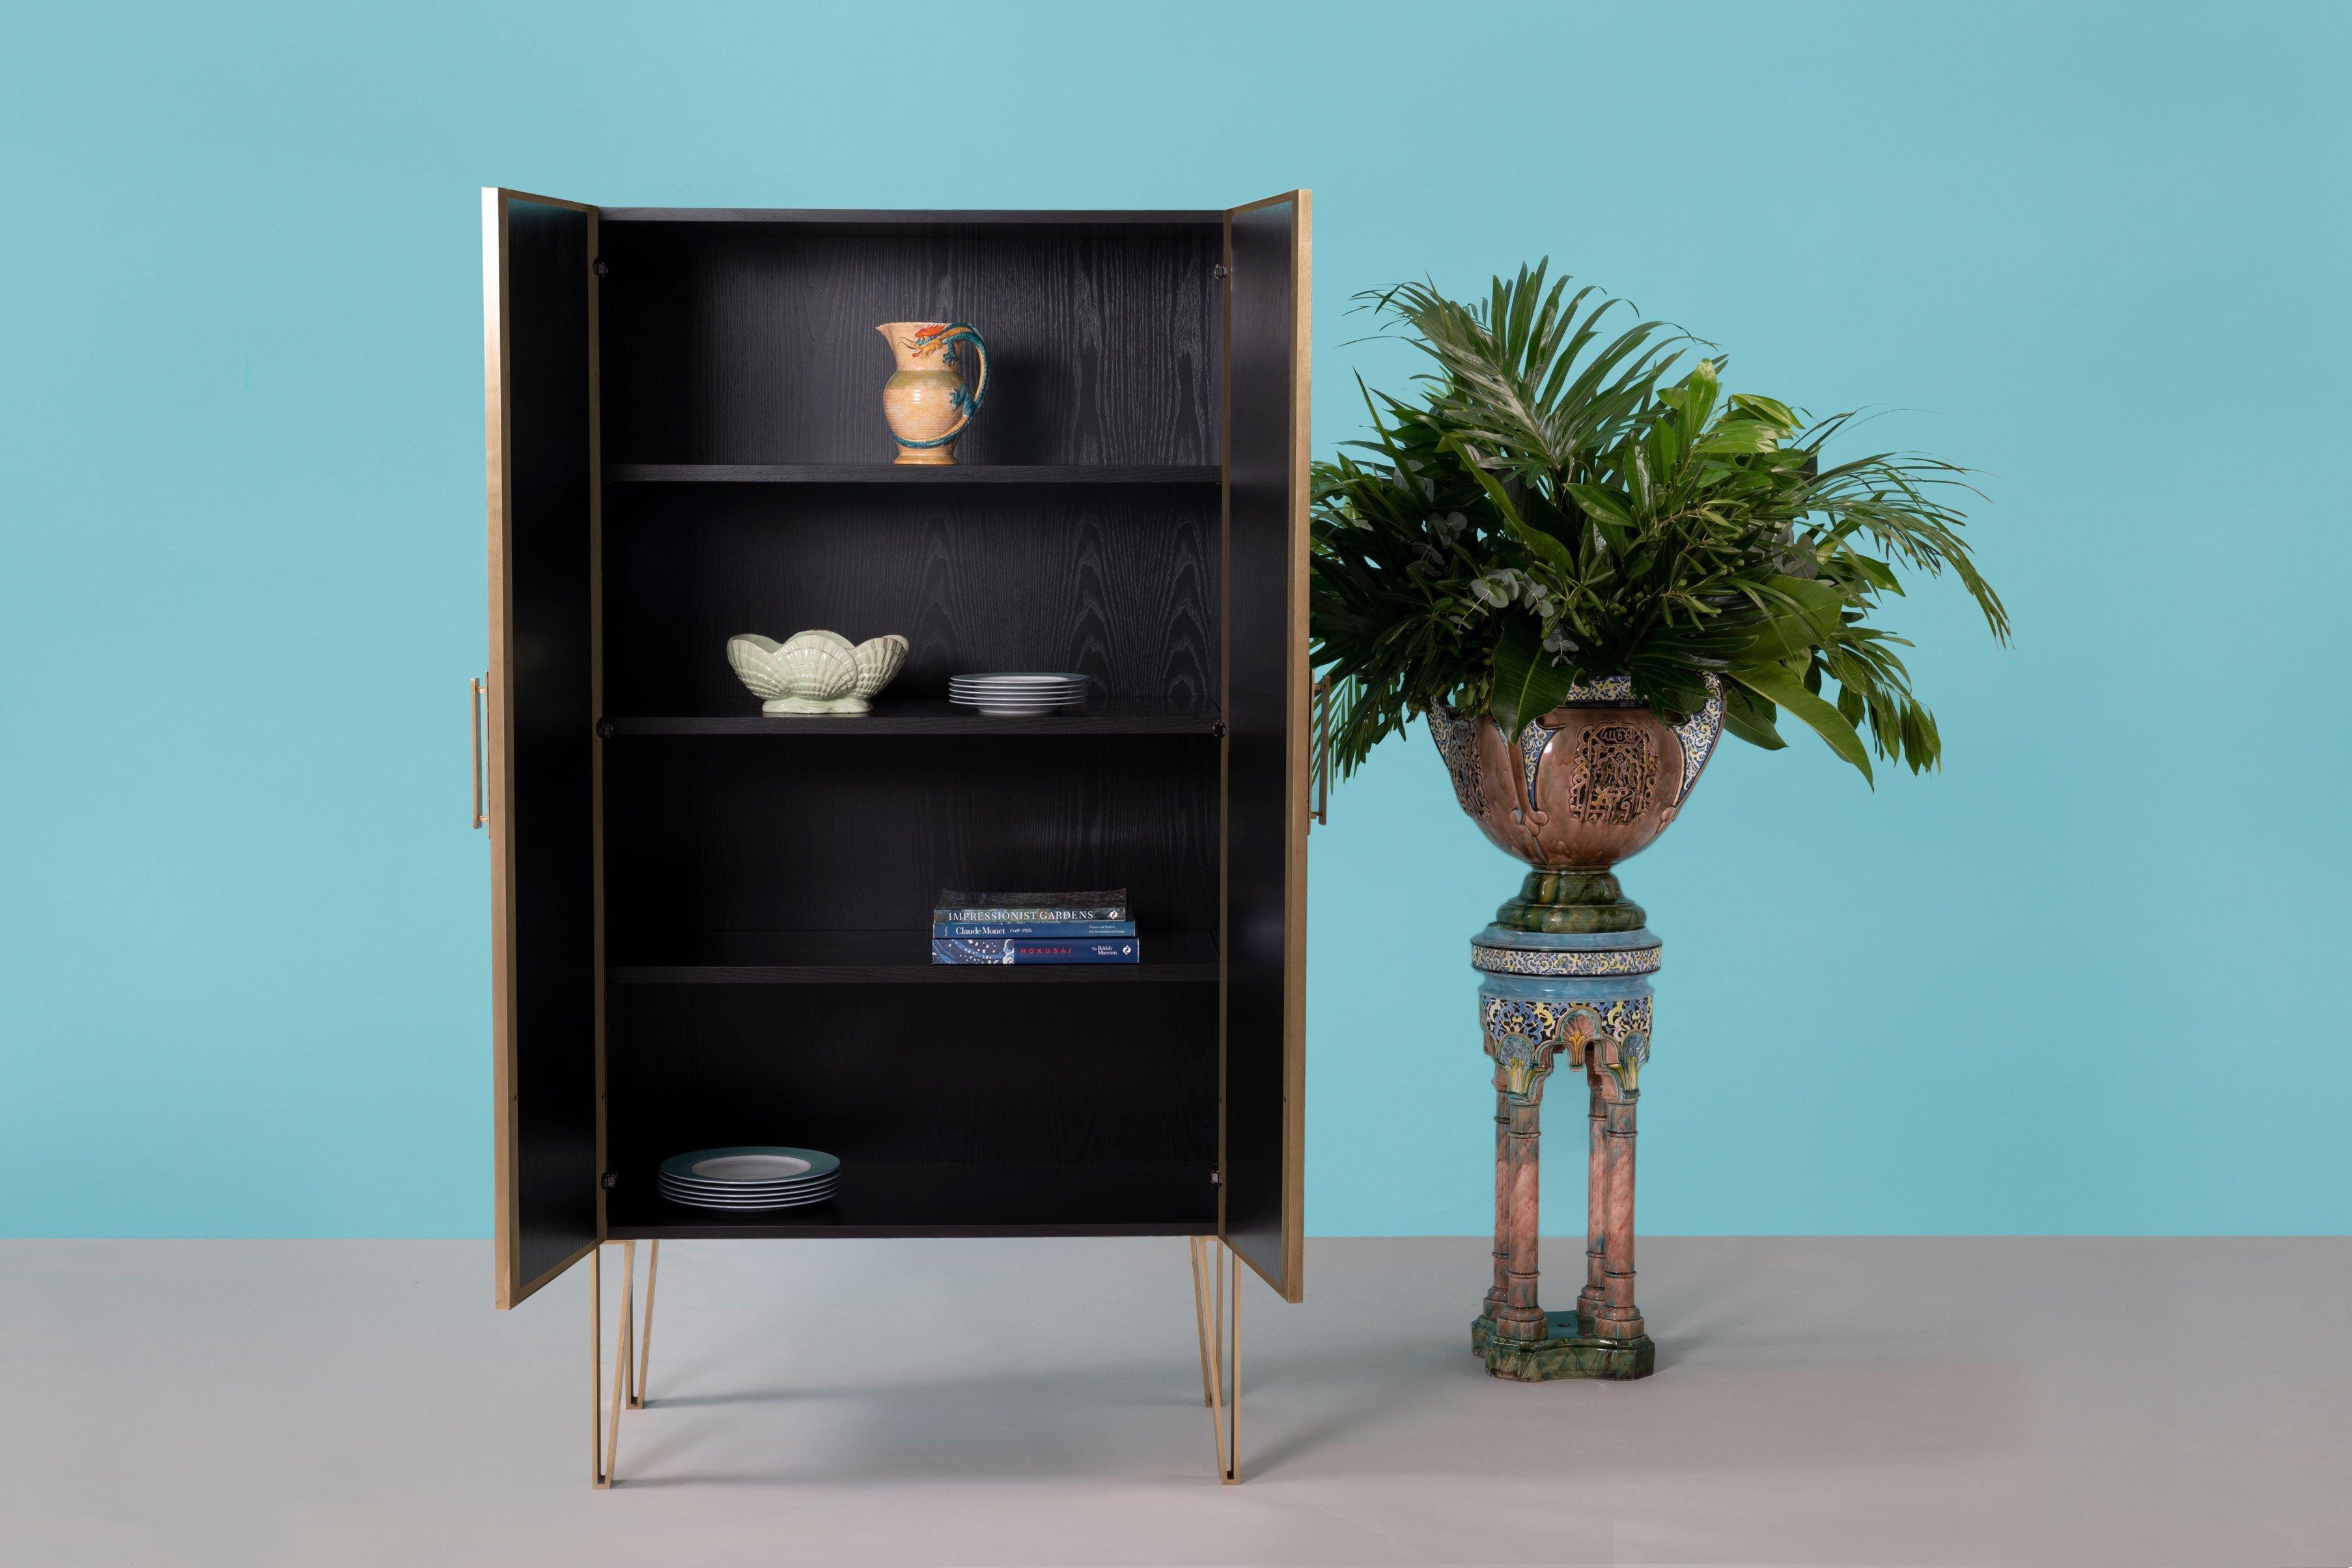 Fine Upholstered in FELDER FELDER’s stunning Butterfly print, the Cordelia cabinet is a bold, confident choice for any interior.

Handcrafted in England from lacquered oak wood, this statement piece is upholstered in sumptuous silk-blend satin and